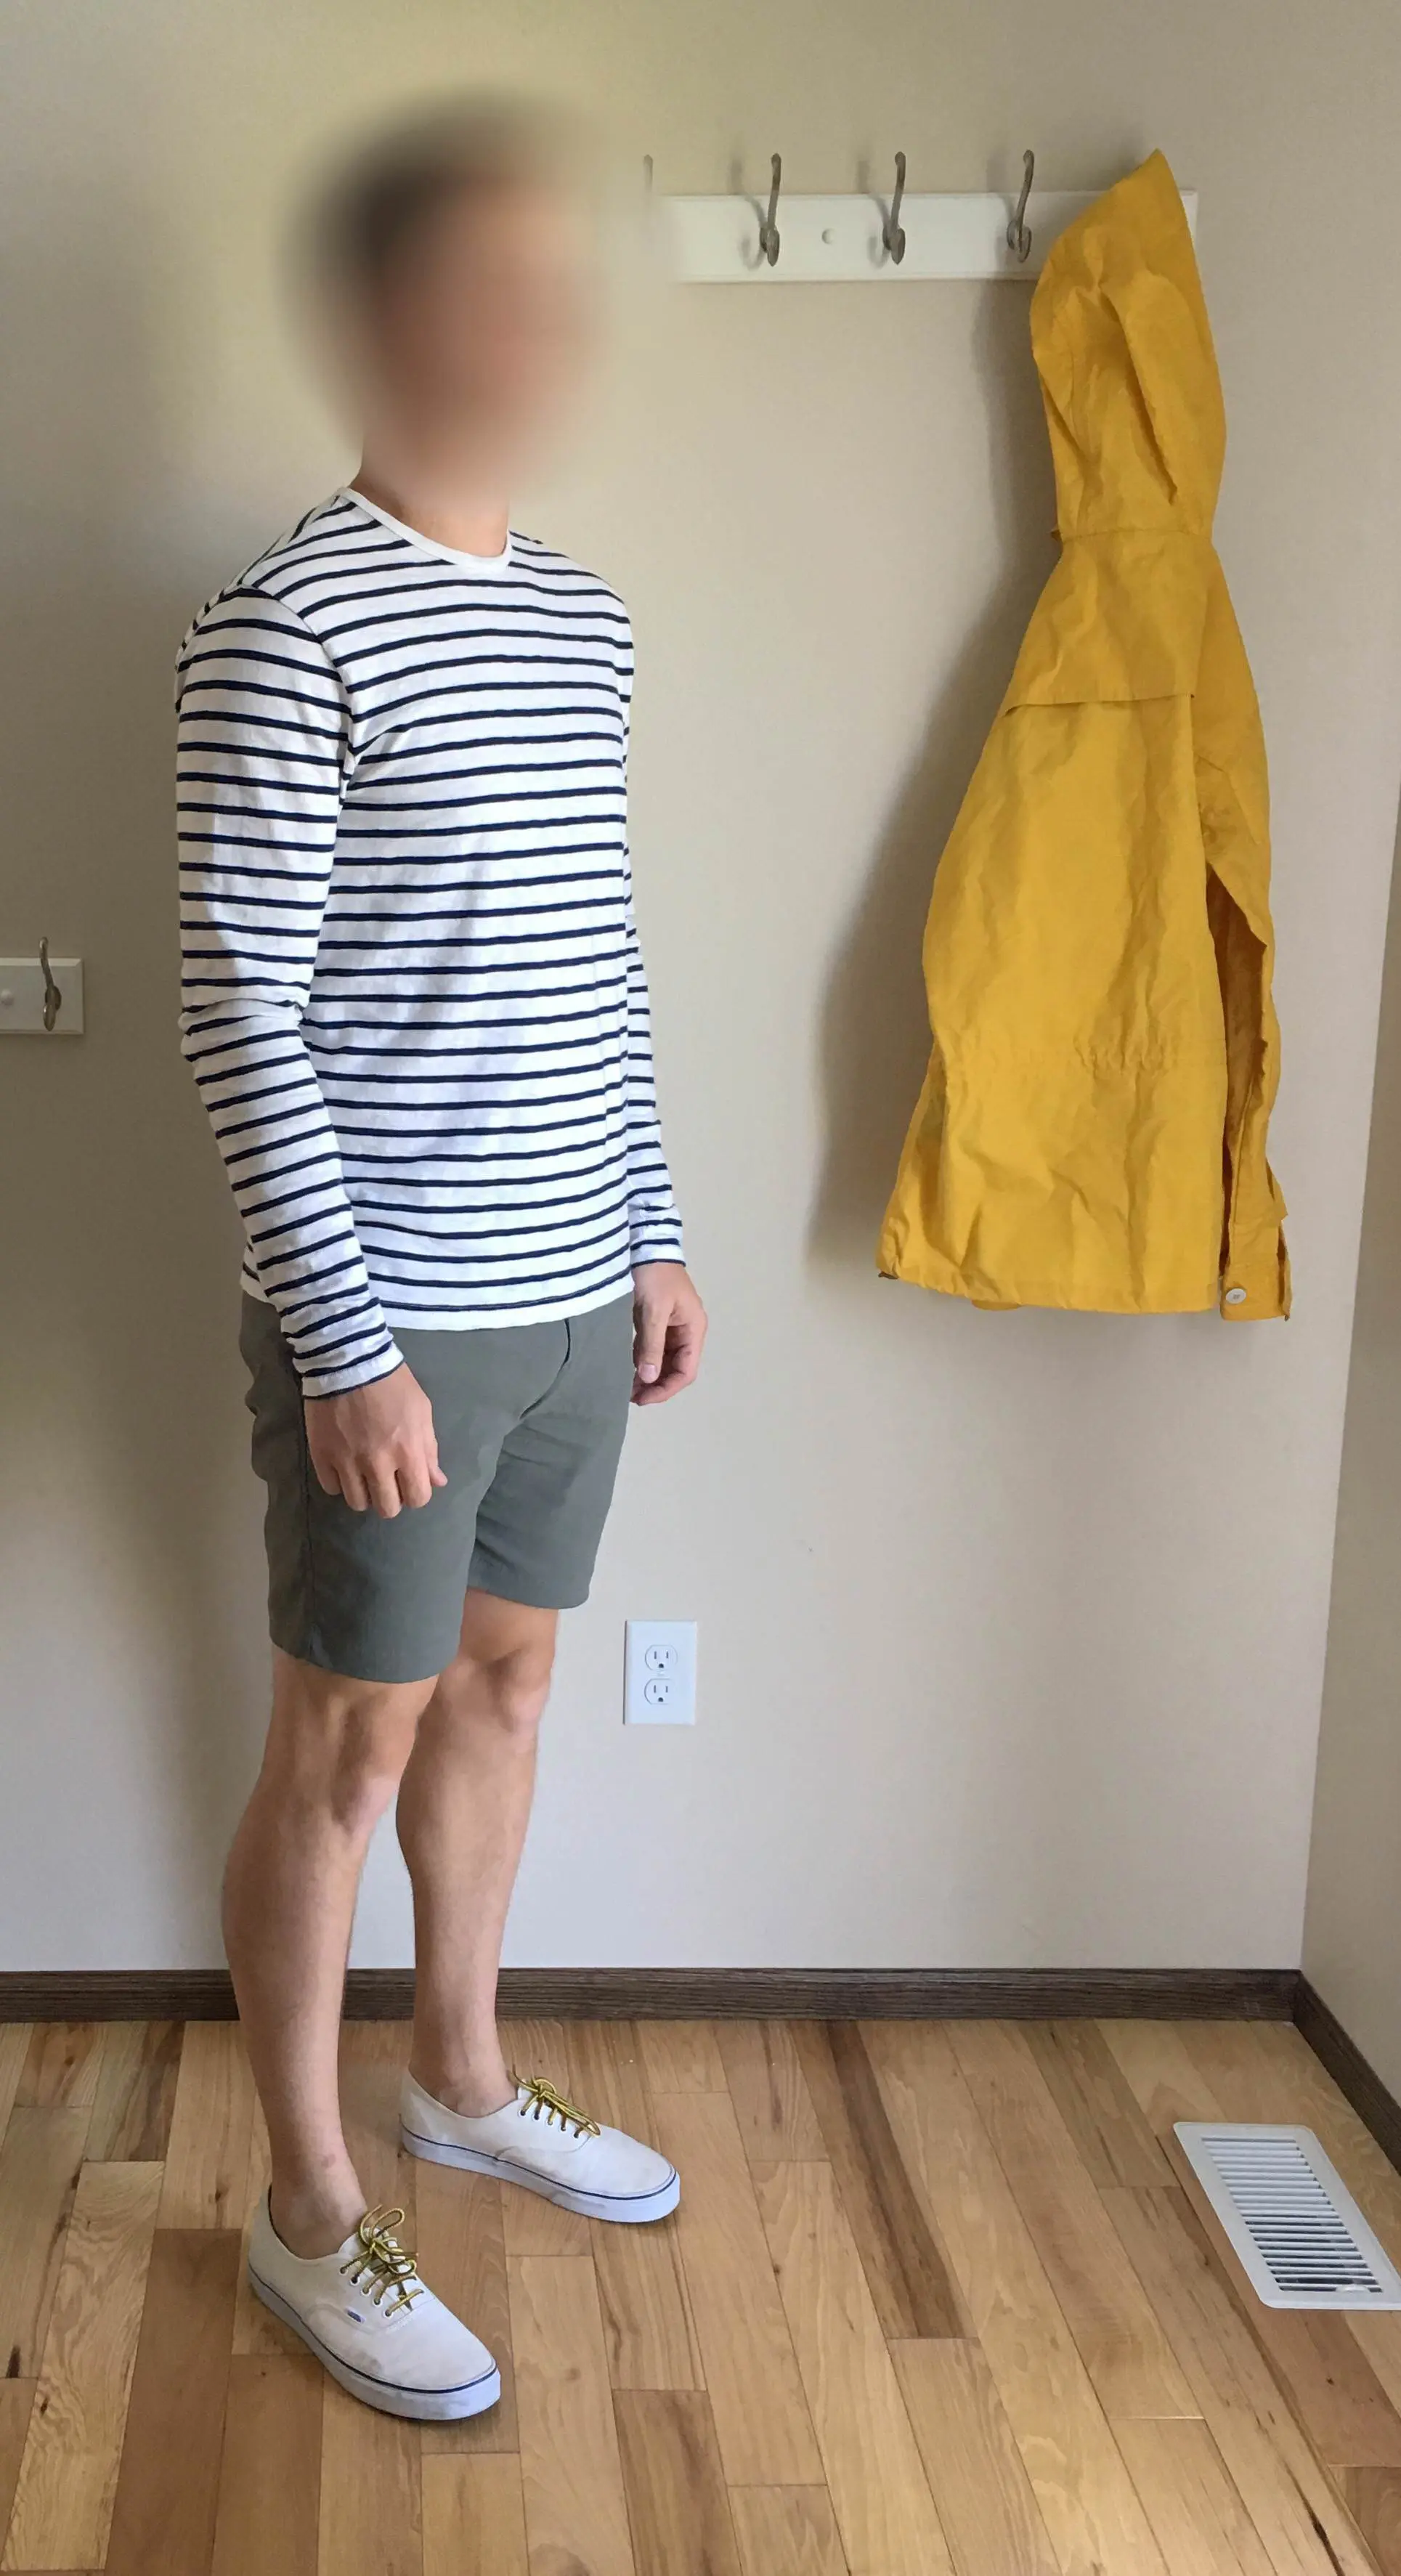 Shorts with long sleeve striped tee